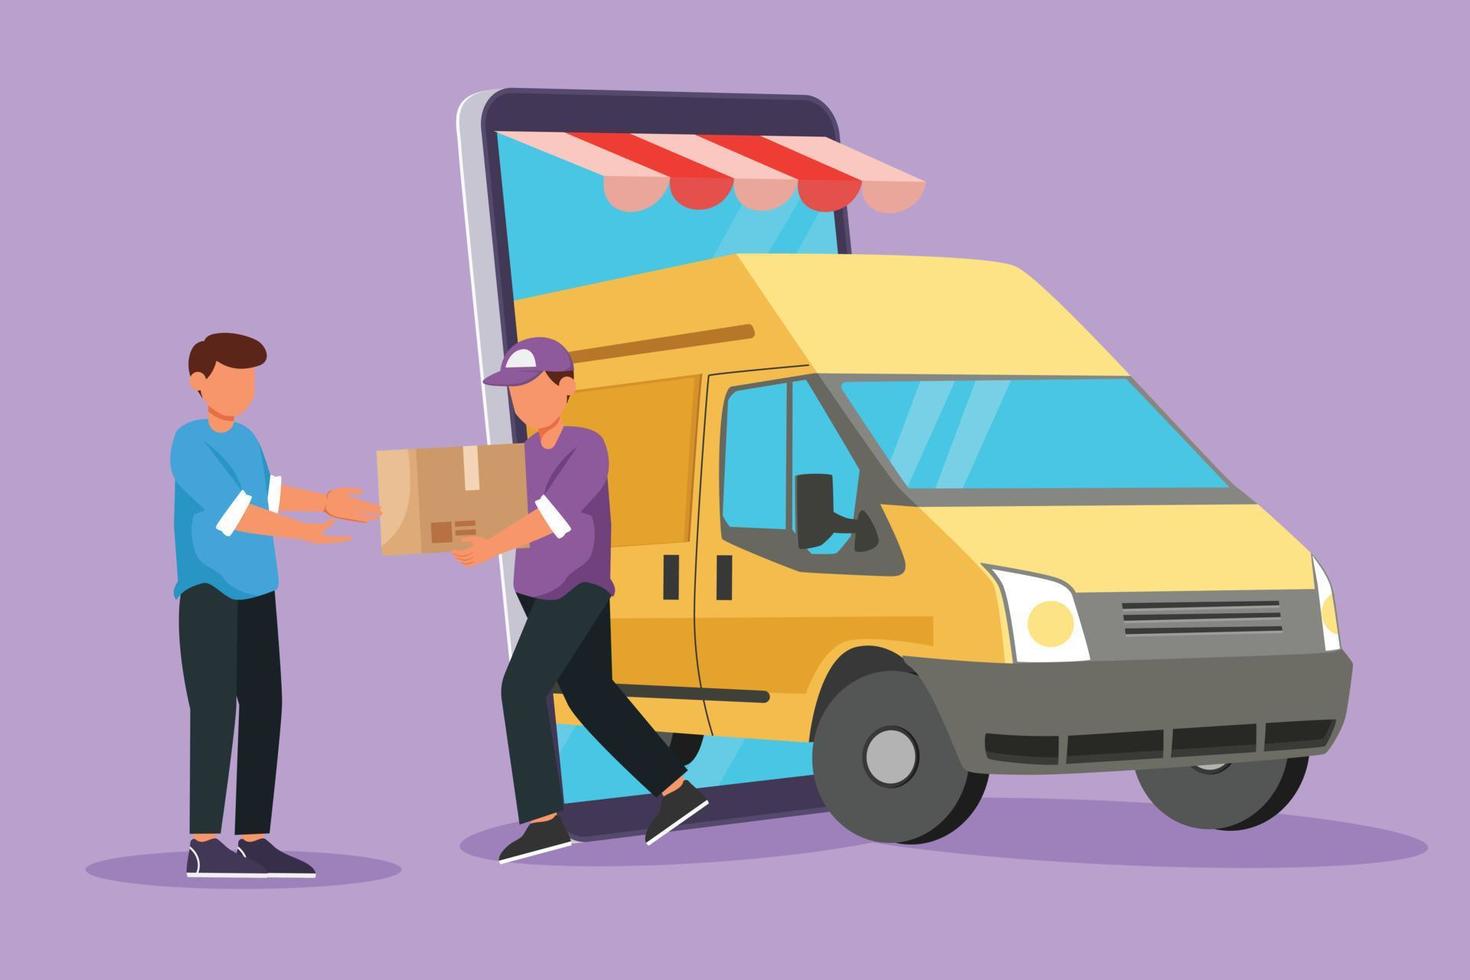 Cartoon flat style drawing delivery box car comes out partly from giant smartphone screen. Male courier gives package box to male customer. Online store transport. Graphic design vector illustration